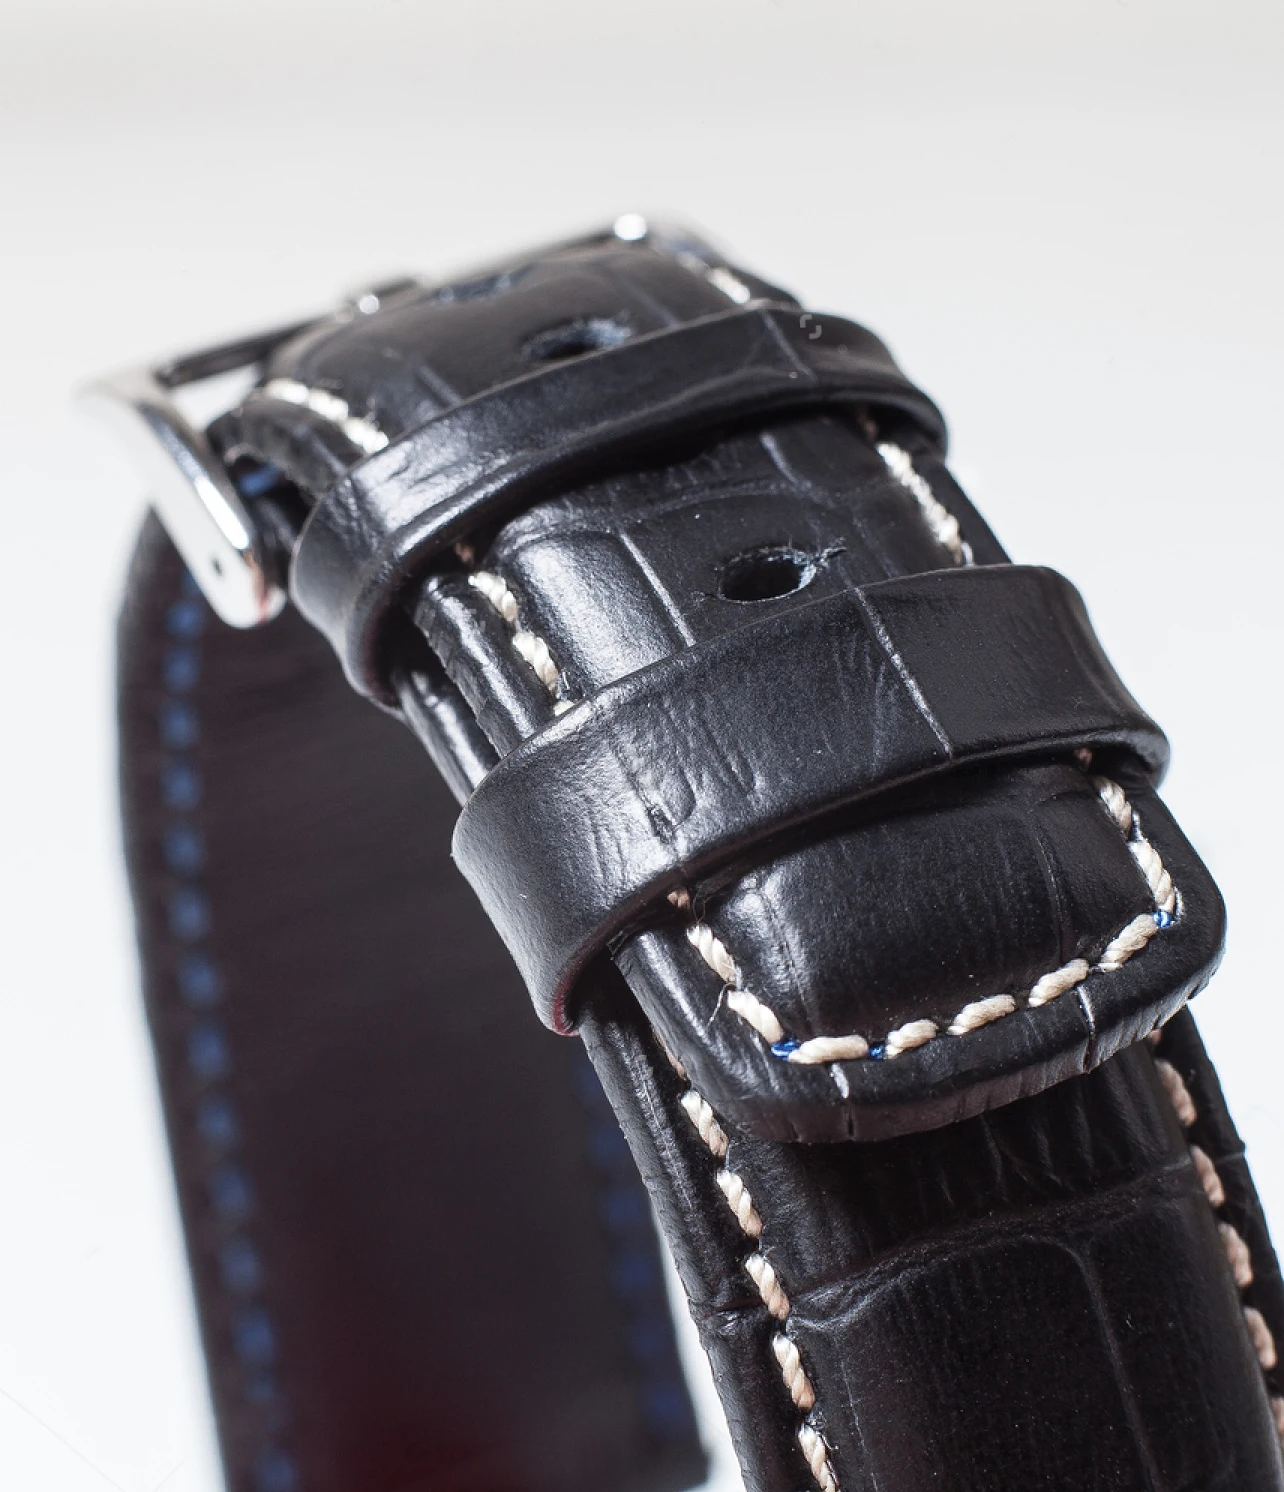 leather watch band strap compatible with all model GMWB5000MB-1 GMWB5000GD-9 GMWB5000-1 GMWB5000D-1 AWM500GD-4A GMWB5000GD-4 enlarge